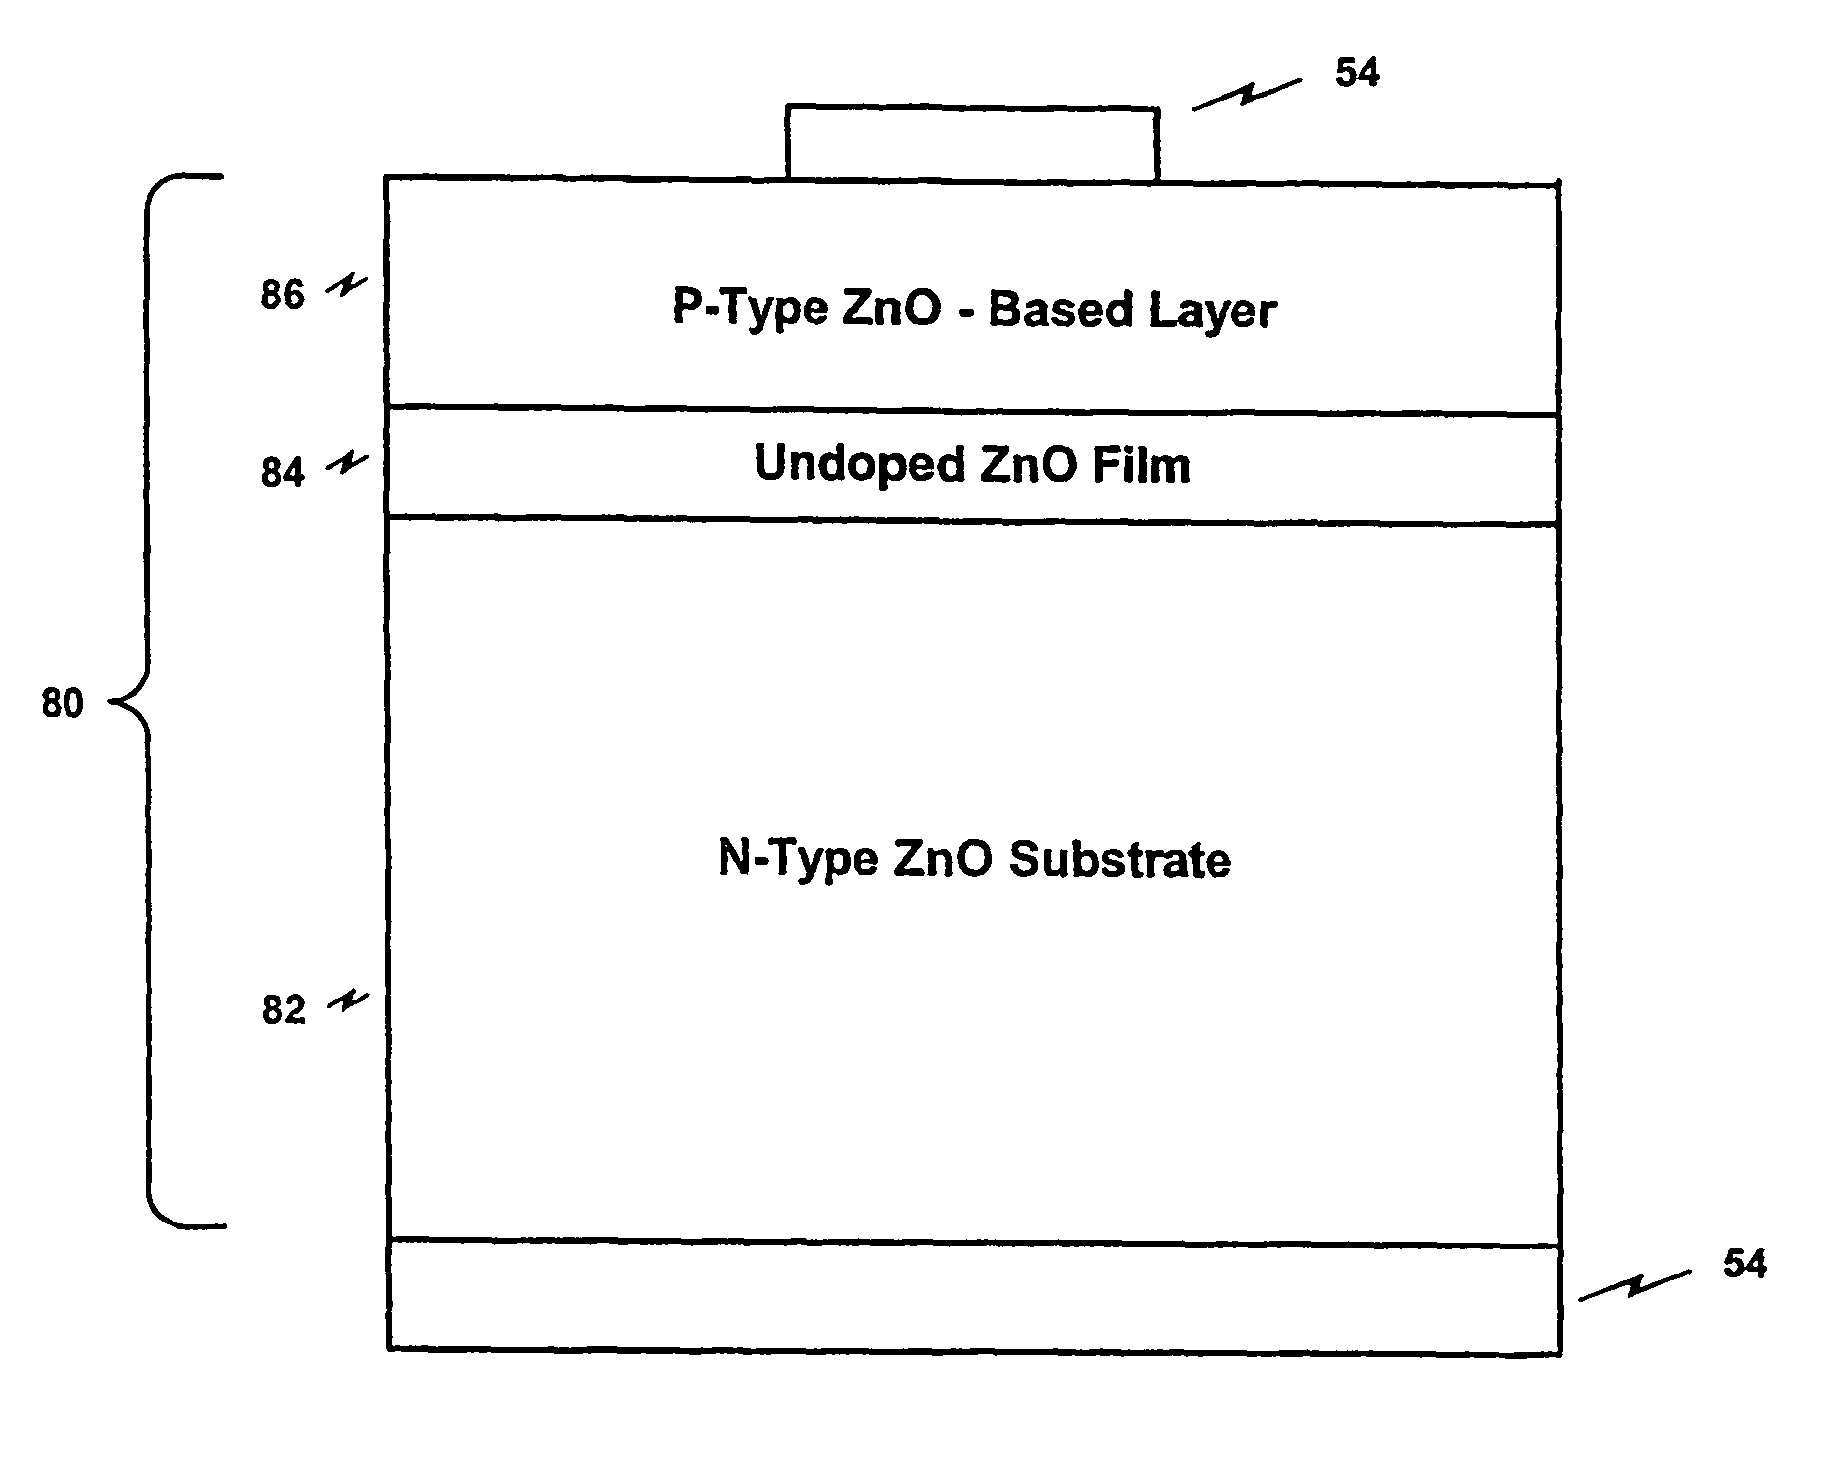 Hybrid beam deposition system and methods for fabricating metal oxide-ZnO films, p-type ZnO films, and ZnO-based II-VI compound semiconductor devices